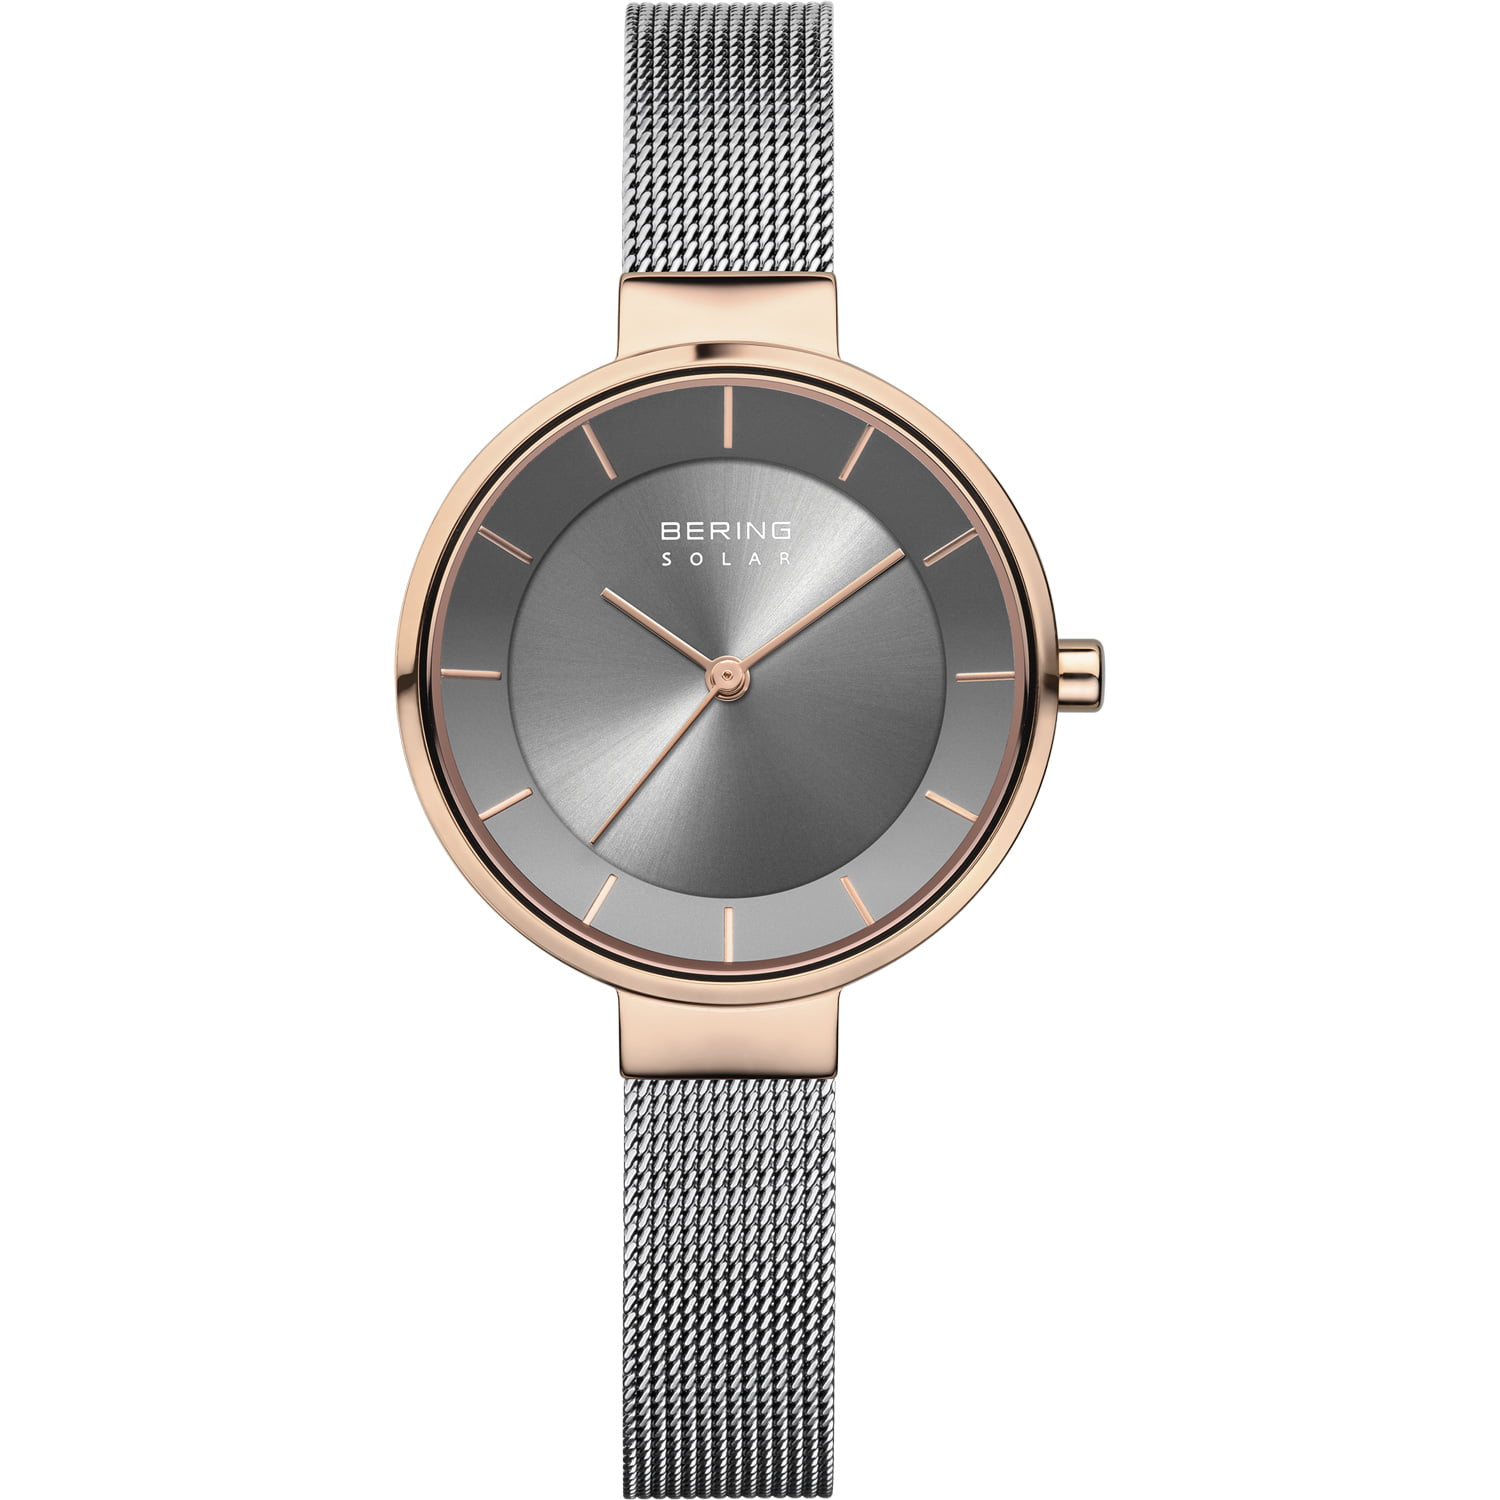 Picture of Bering Time 14631-369 Solar Analogue Solar Stainless Steel Wristswatch for Women, Rose Gold Glanzend